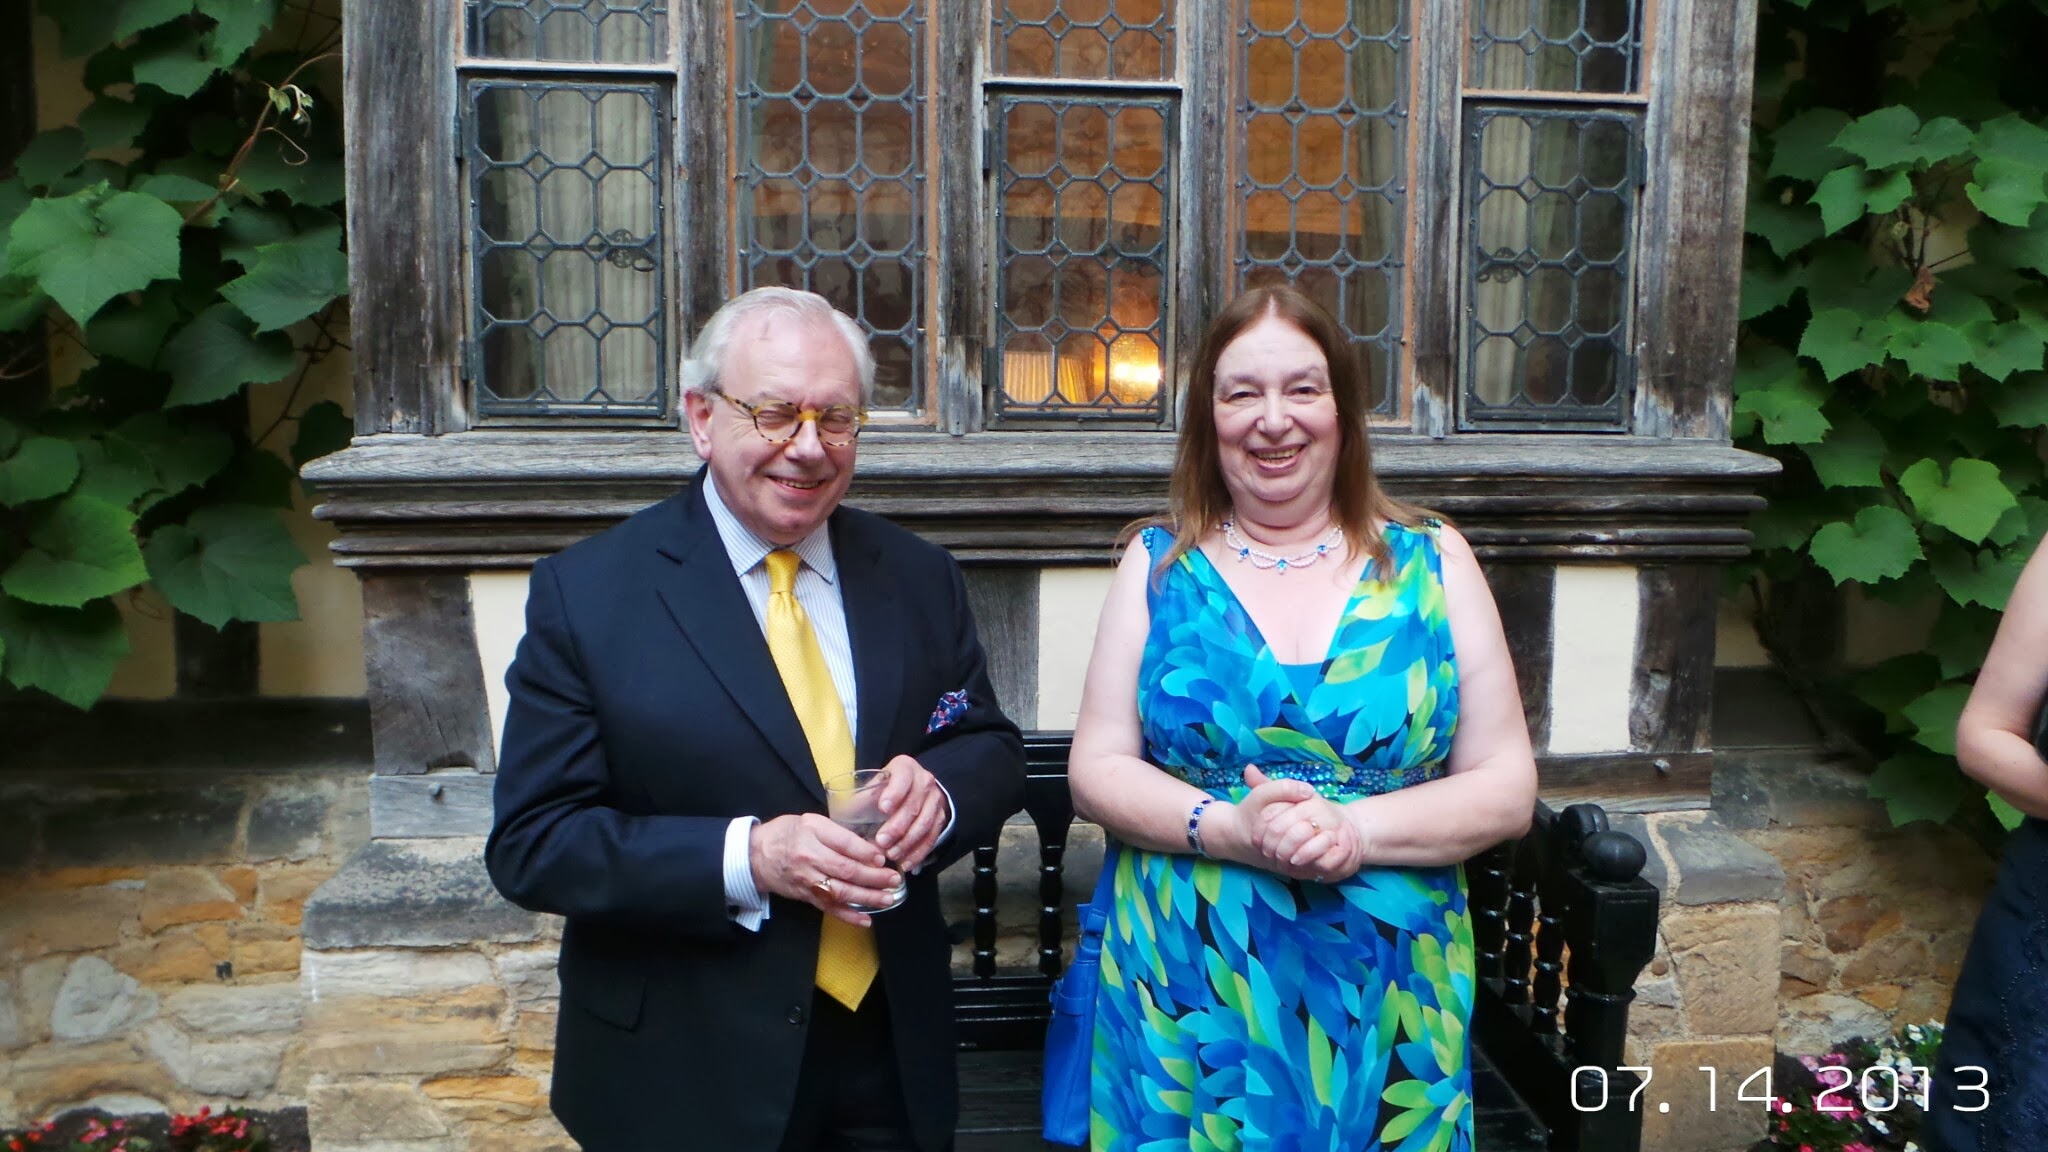 Alison Weir and David Starkey at Hever Castle